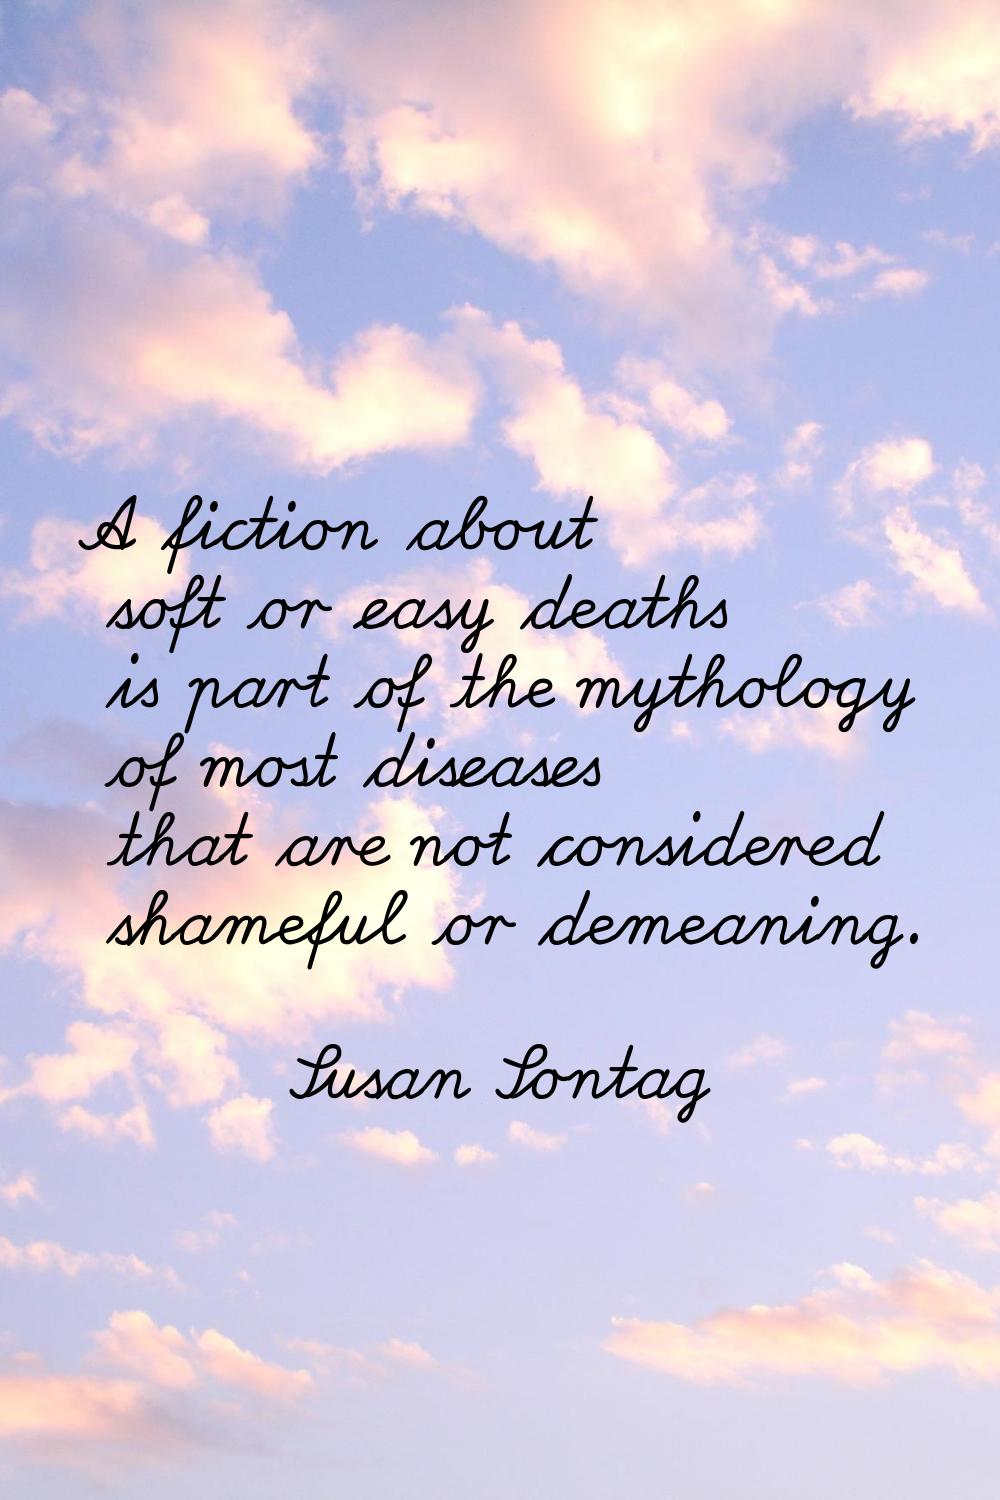 A fiction about soft or easy deaths is part of the mythology of most diseases that are not consider